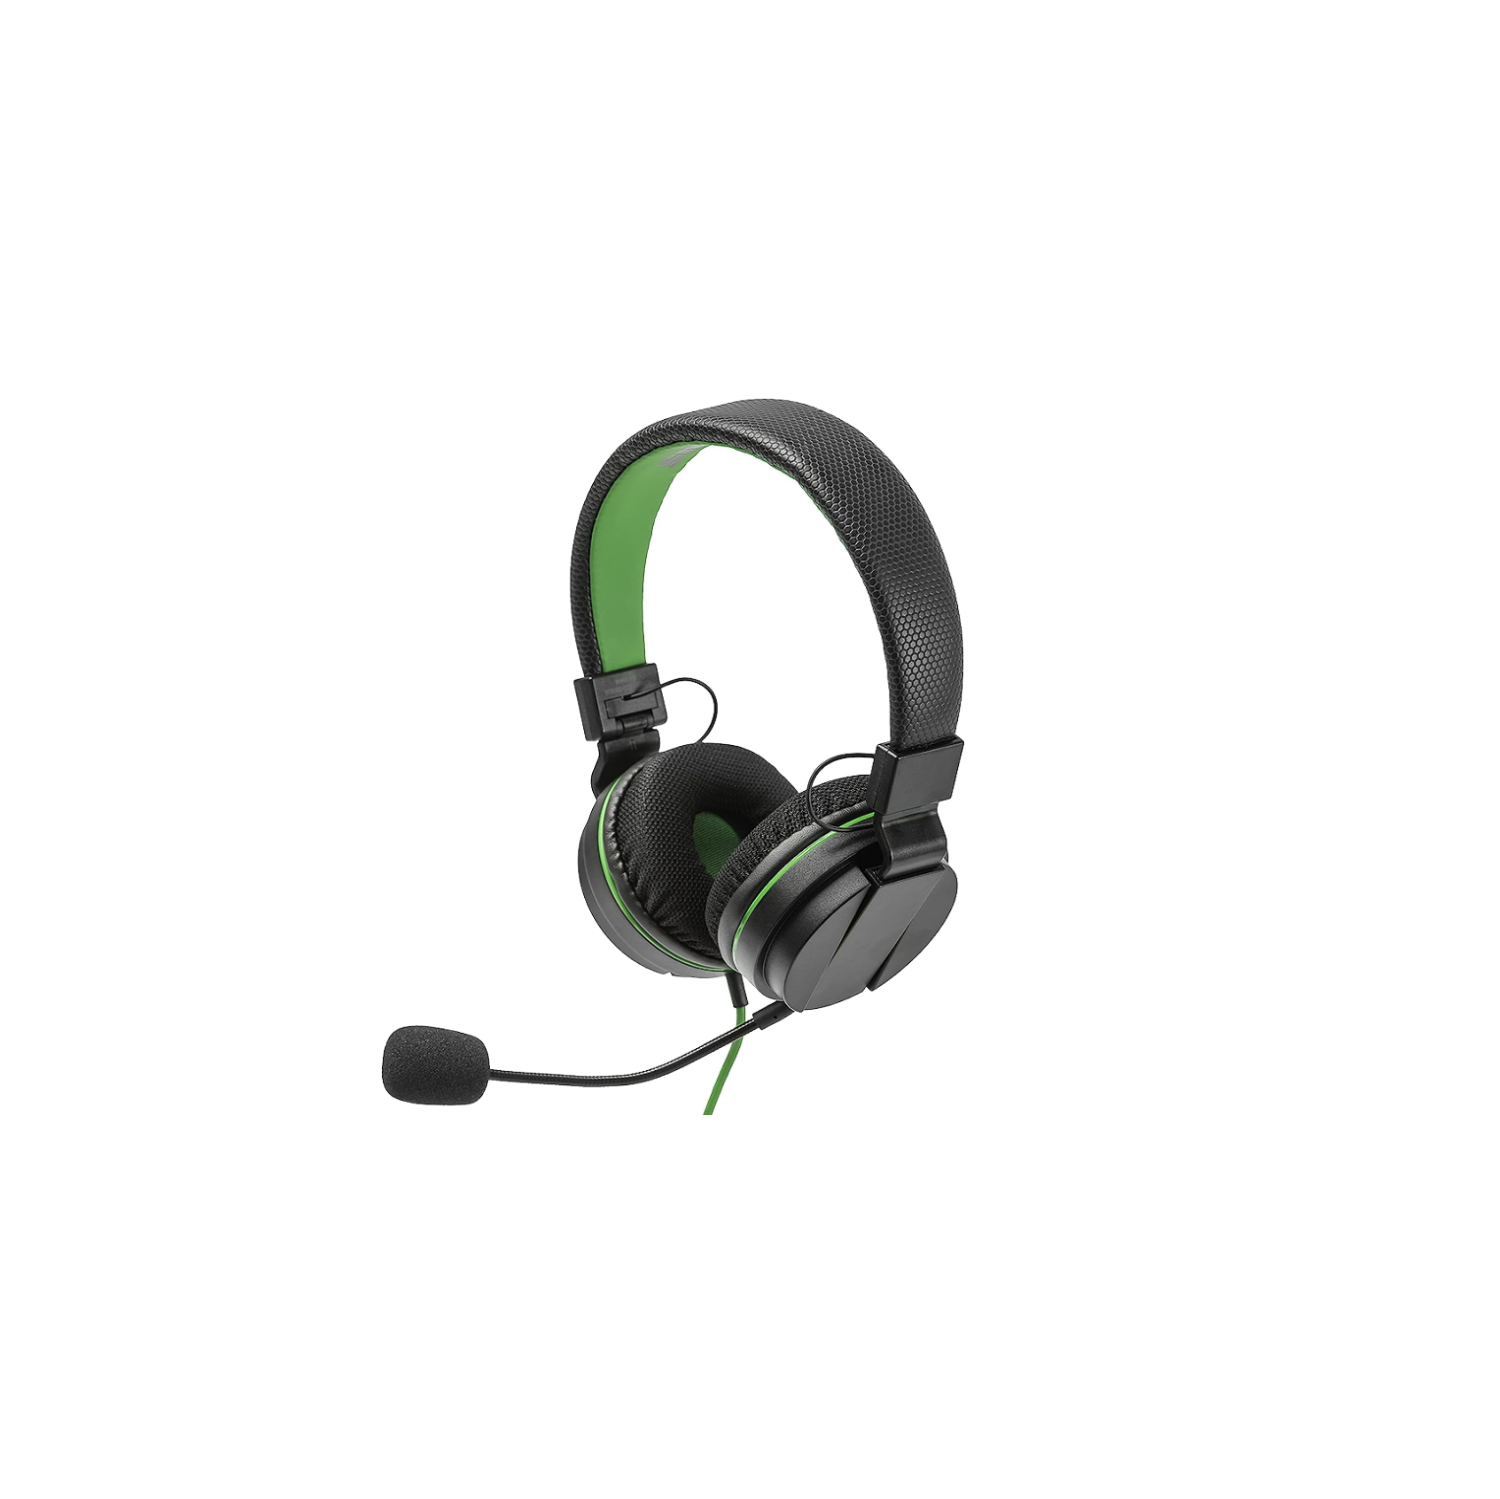 Wired stereo headphone for use with Xbox One- 40mm neodymium drivers for excelle